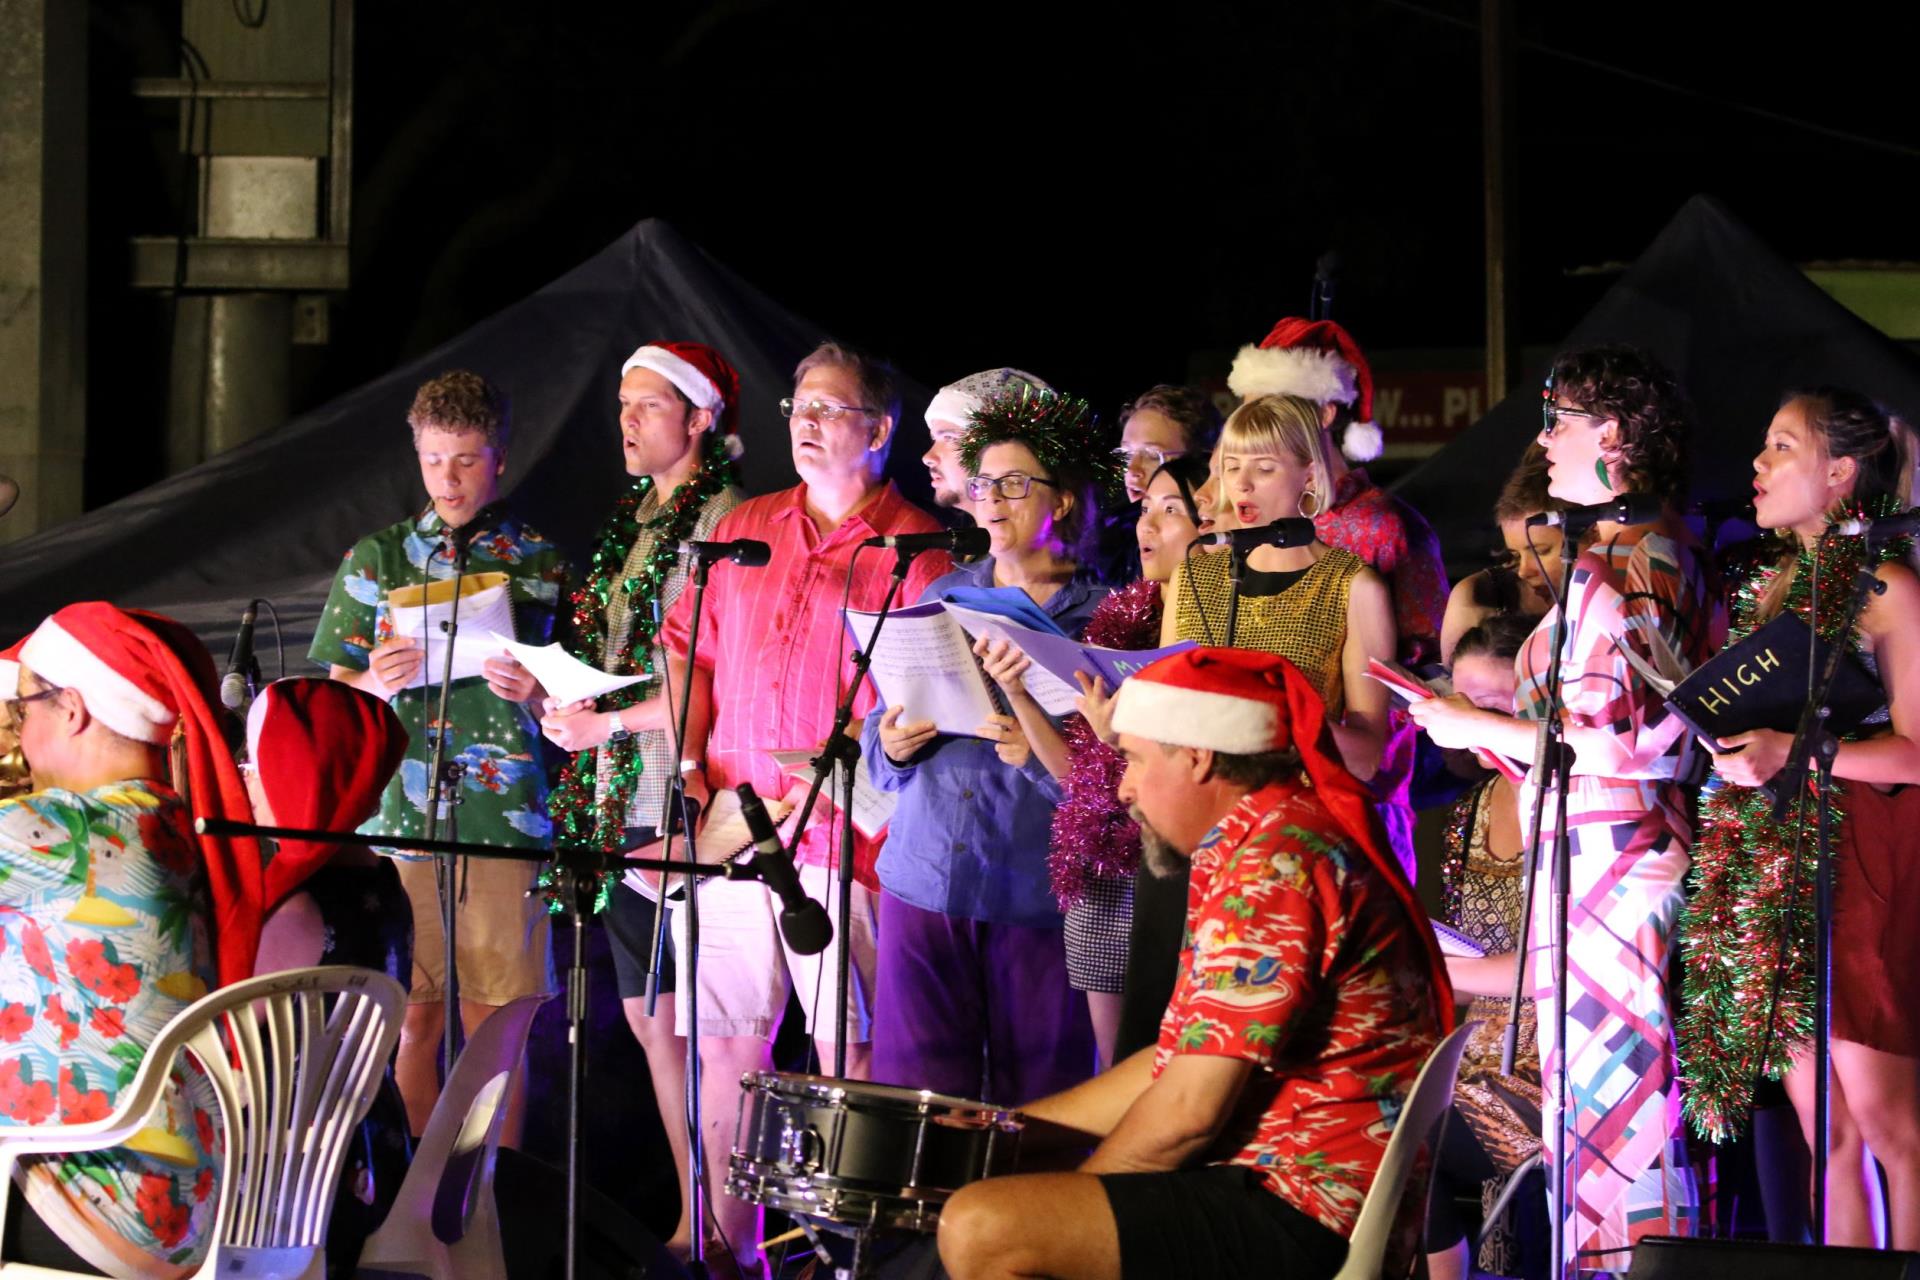 Media Release - Come All Ye Carollers